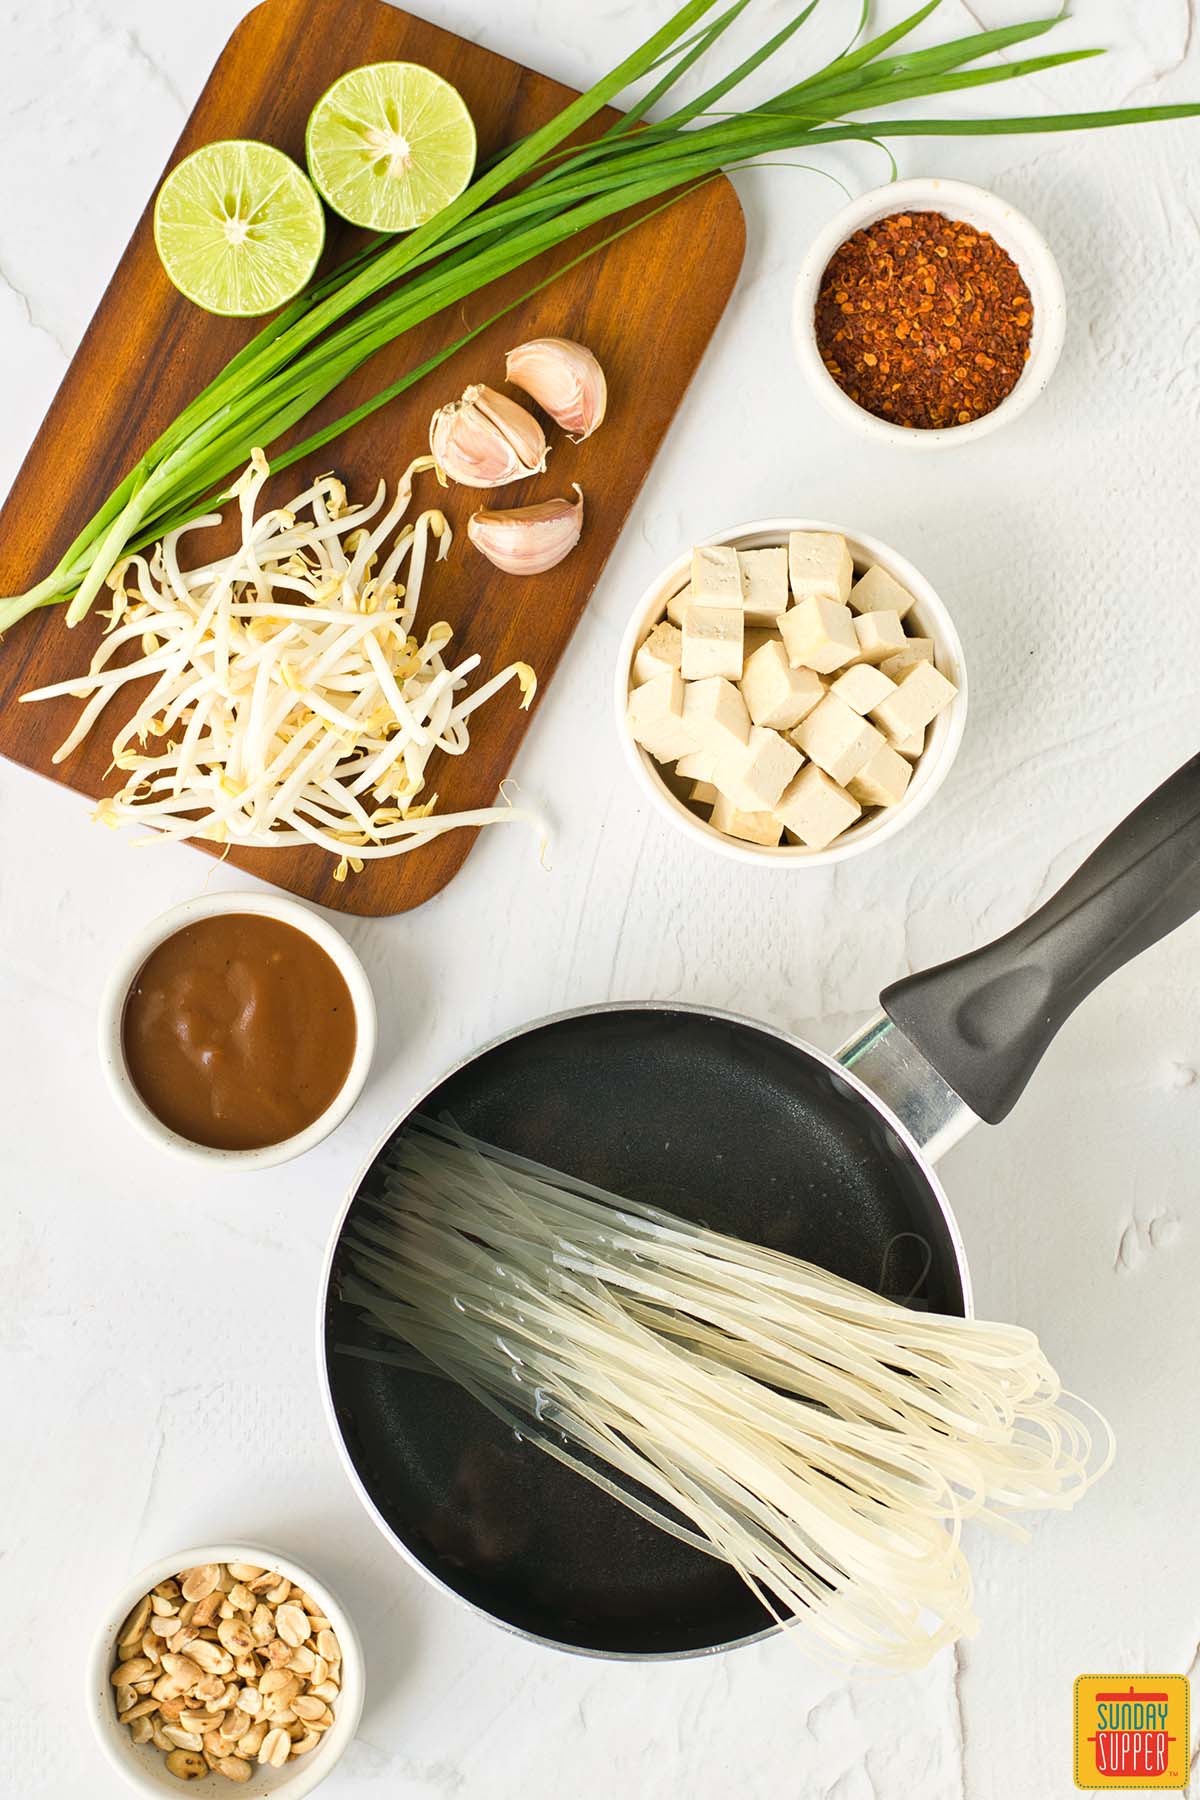 rice noodles cooking in water next to cutting board with other pad thai ingredients